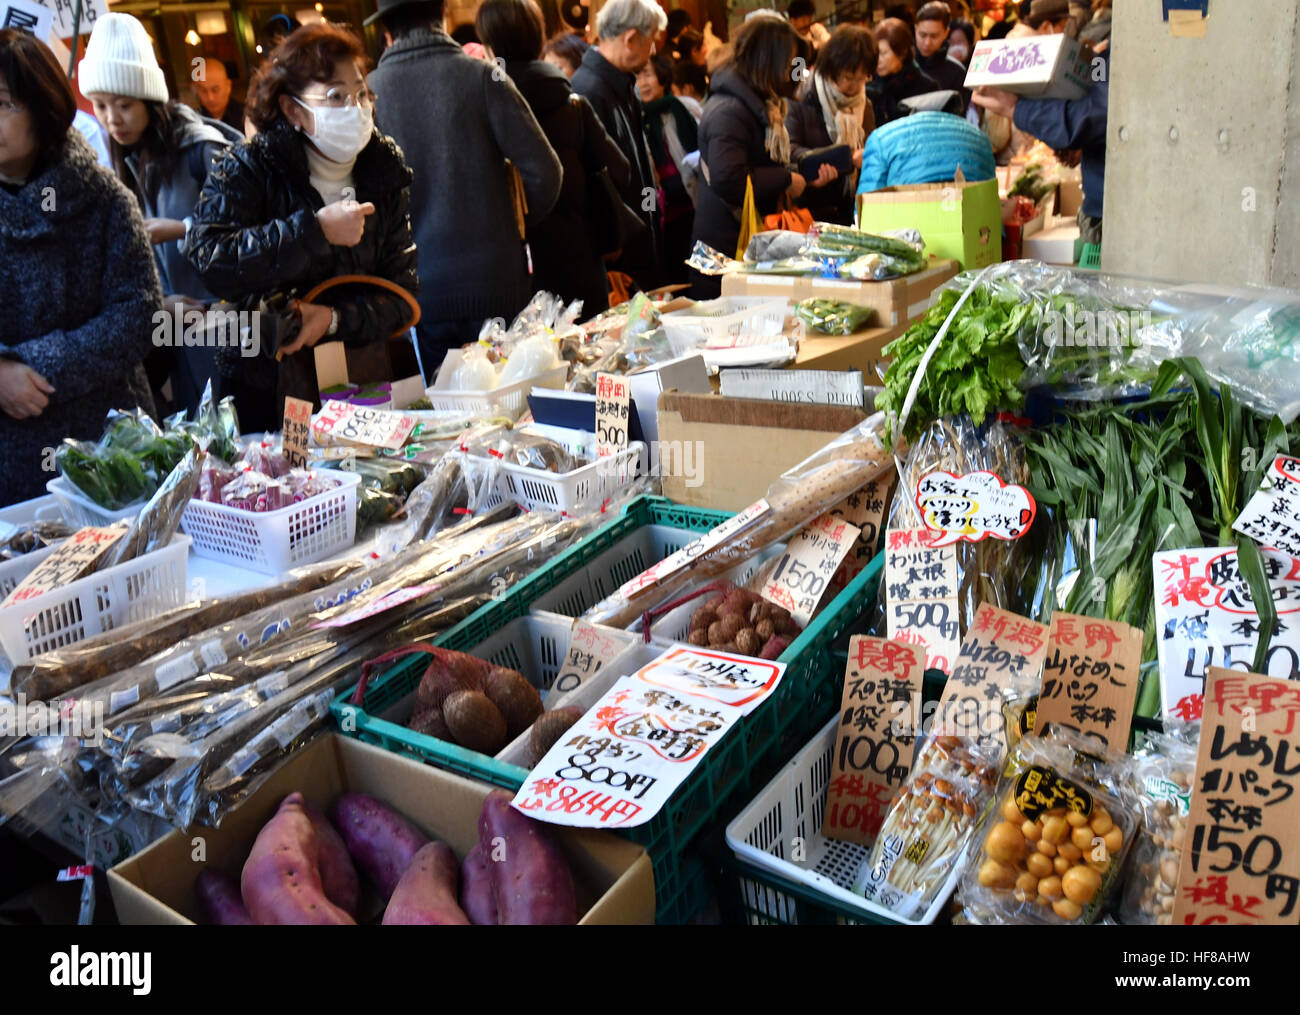 Tokyo, Japan. 28th Dec, 2016. A flock of bargain-hunters and some foreign tourists throngs the narrow maze of alleys lined with hundreds of small shops and stalls selling fresh fish and marine products outside of Tokyo's main fish market in Tsukiji on Wednesday, December 28, 2016, the customary last business day of the year. The planned move of the nation's largest wholesale market to the neighboring Toyosu district still hangs in limbo over soil pollution fears and bickering between those for and against the change. © Natsuki Sakai/AFLO/Alamy Live News Stock Photo